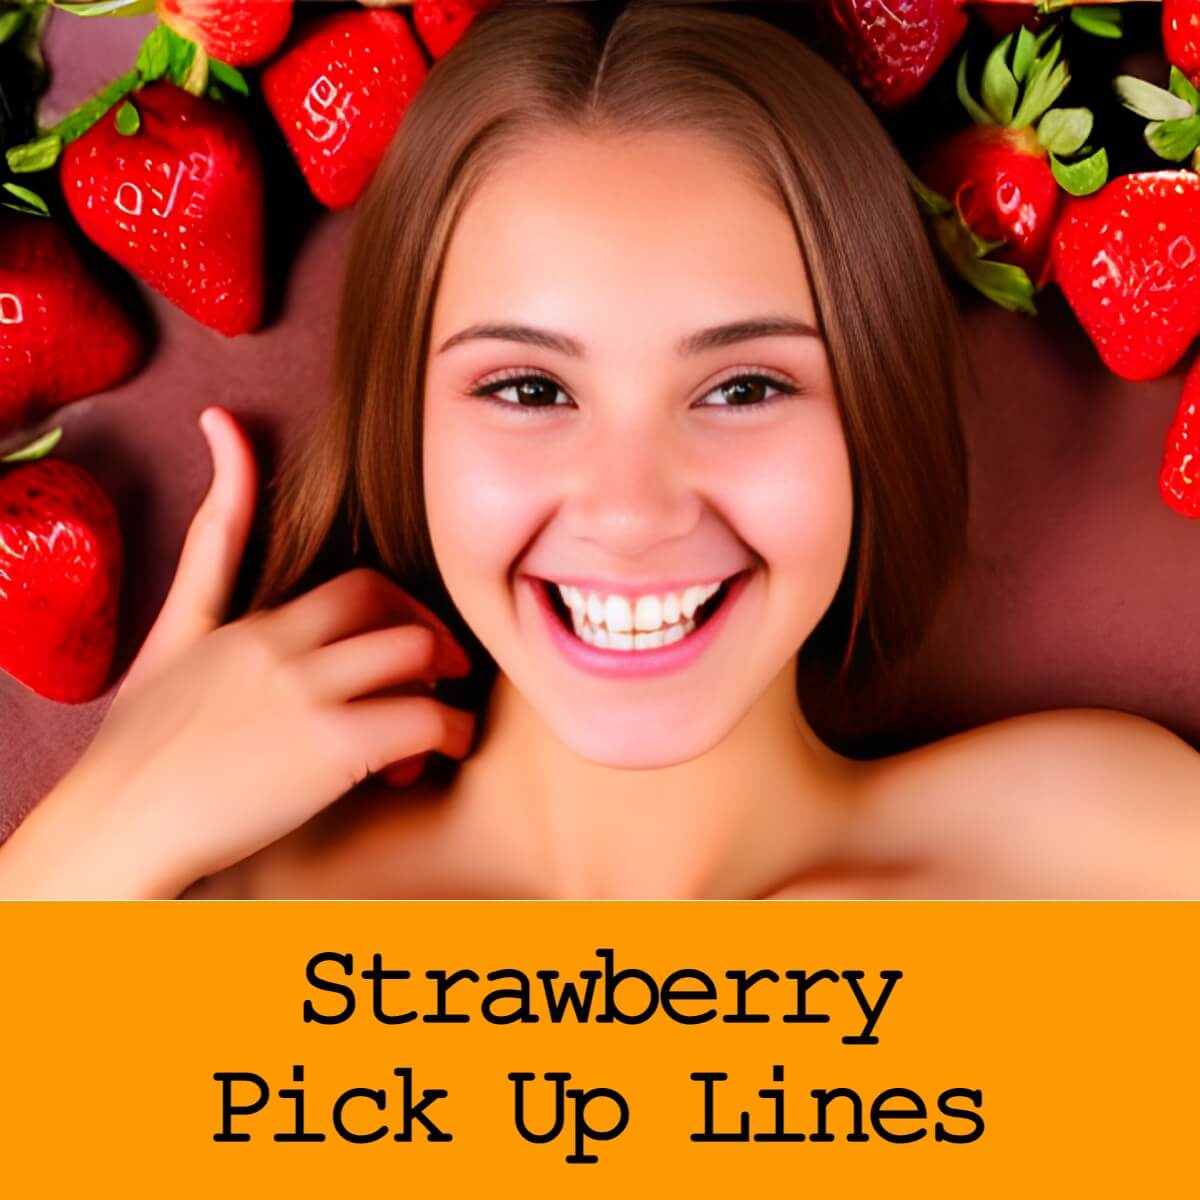 Pick Up Lines About Strawberry